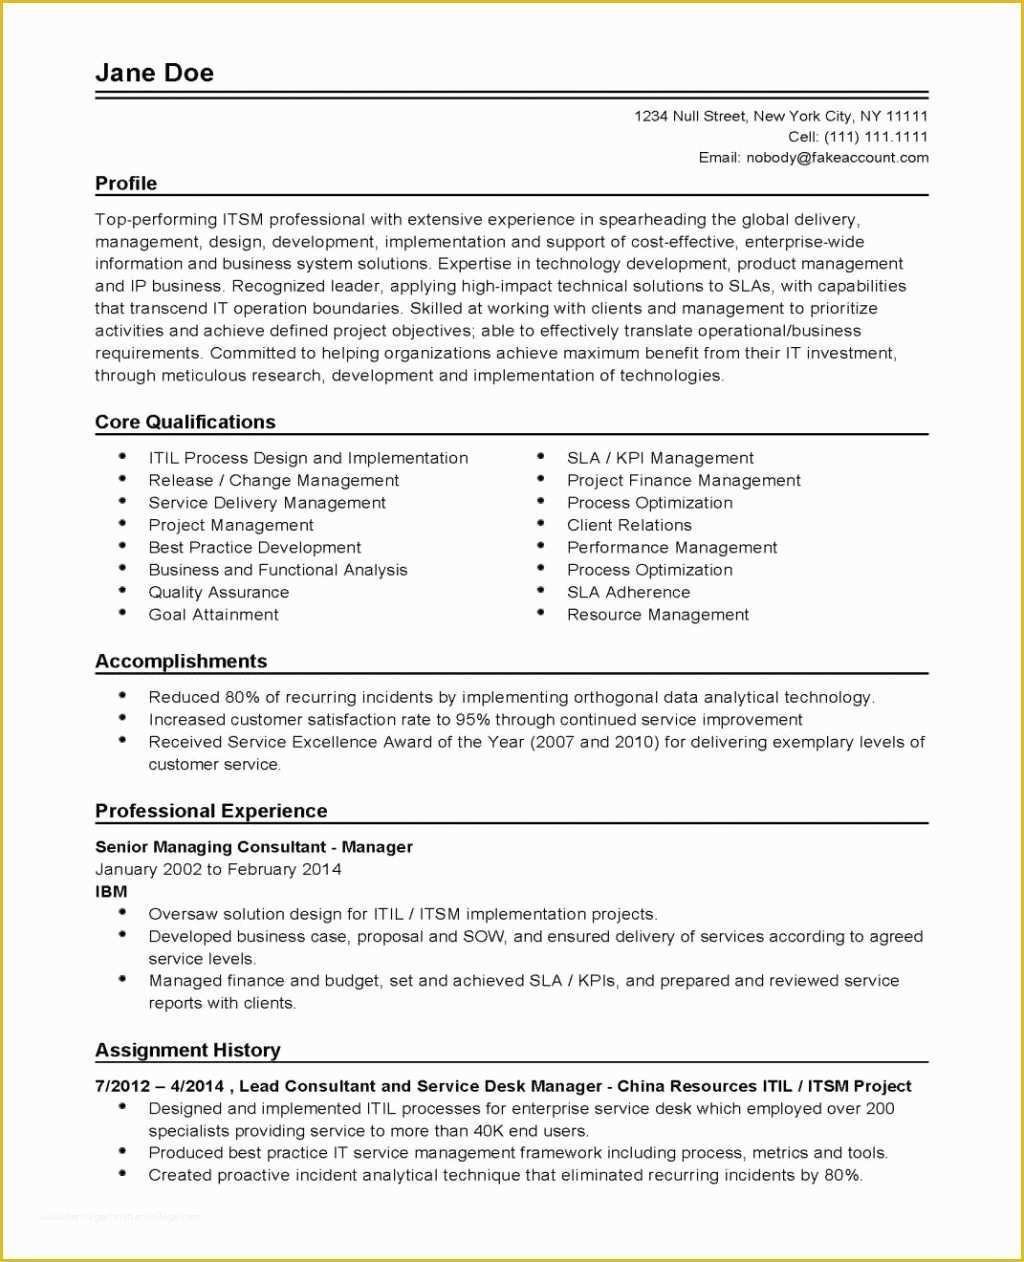 Free Hybrid Resume Template Word Of Resume and Template Free Hybrid Resume Template Word